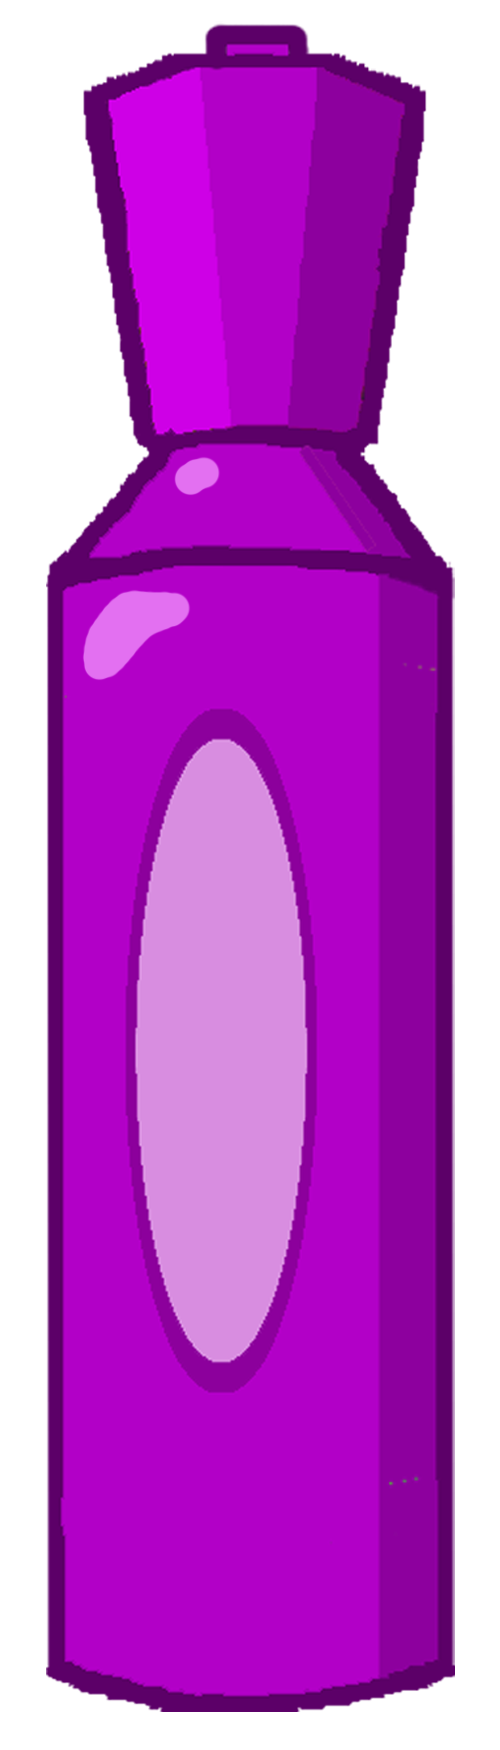 Marker clipart magenta. Image new body png